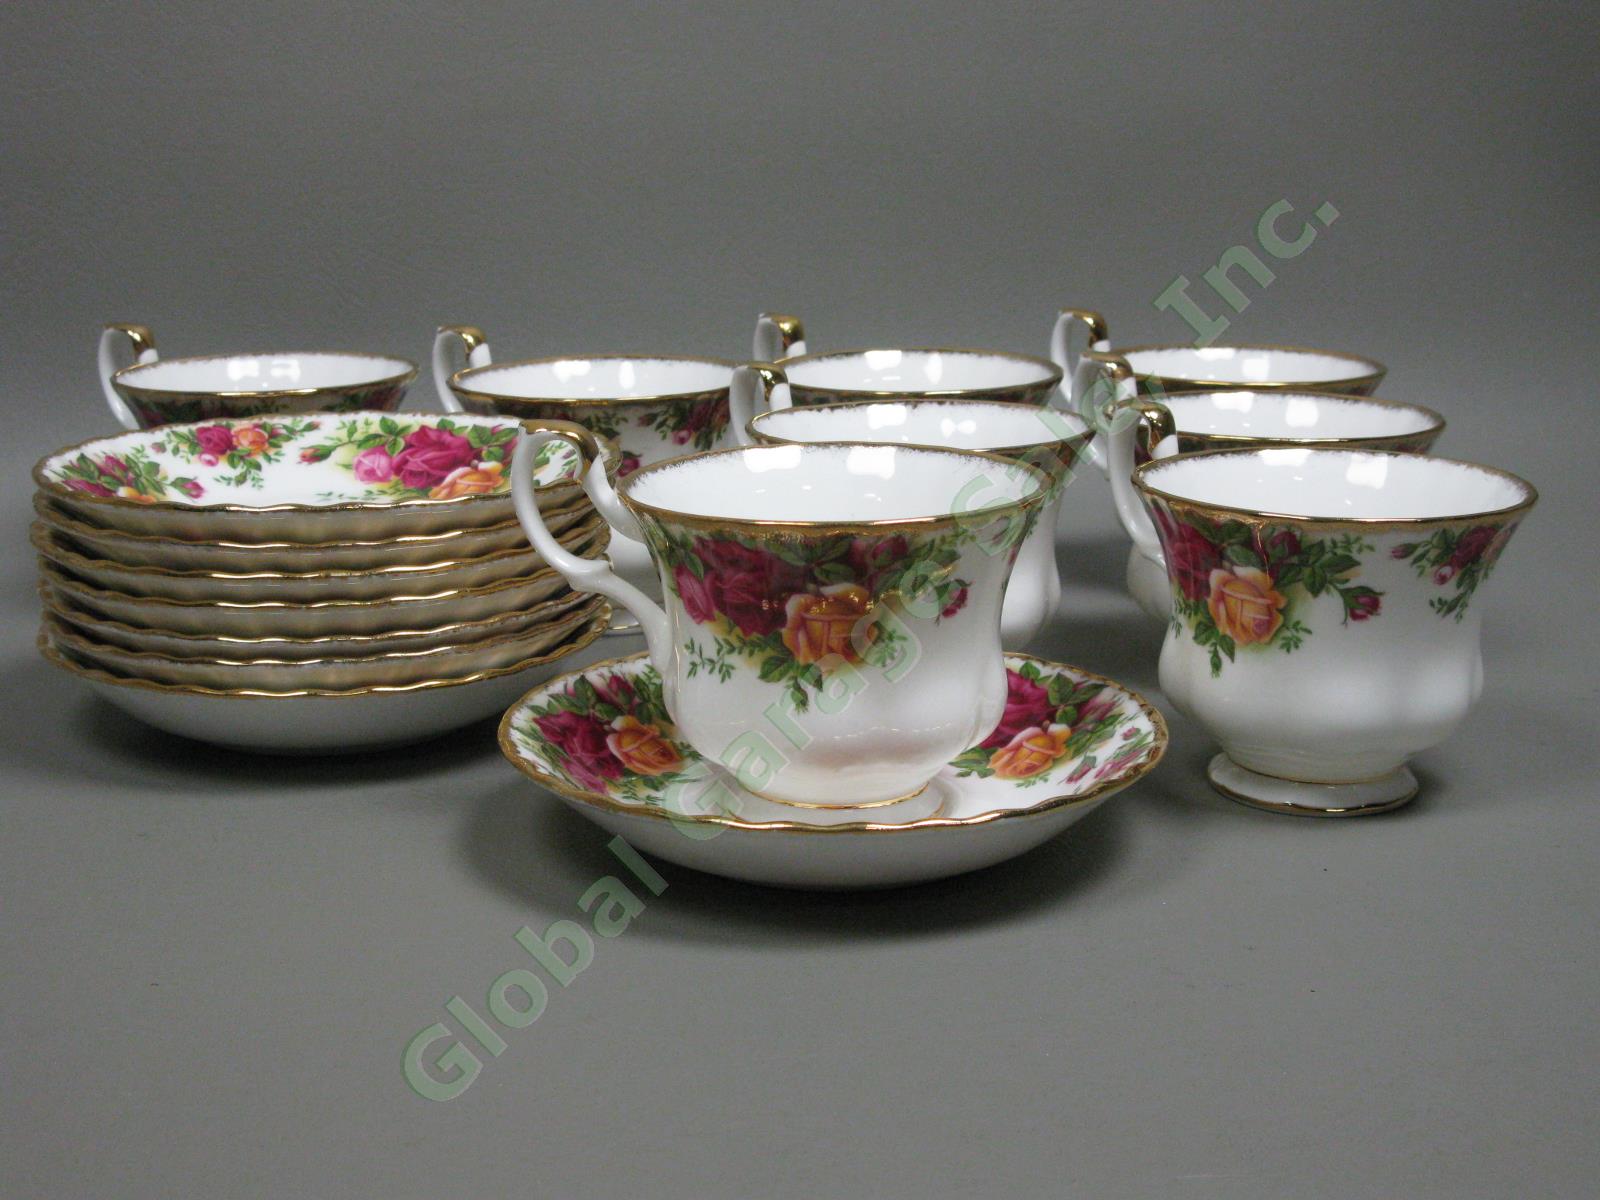 8 Royal Albert Old Country Roses Footed Tea Cup/Saucer Gold Trim Bone China Set